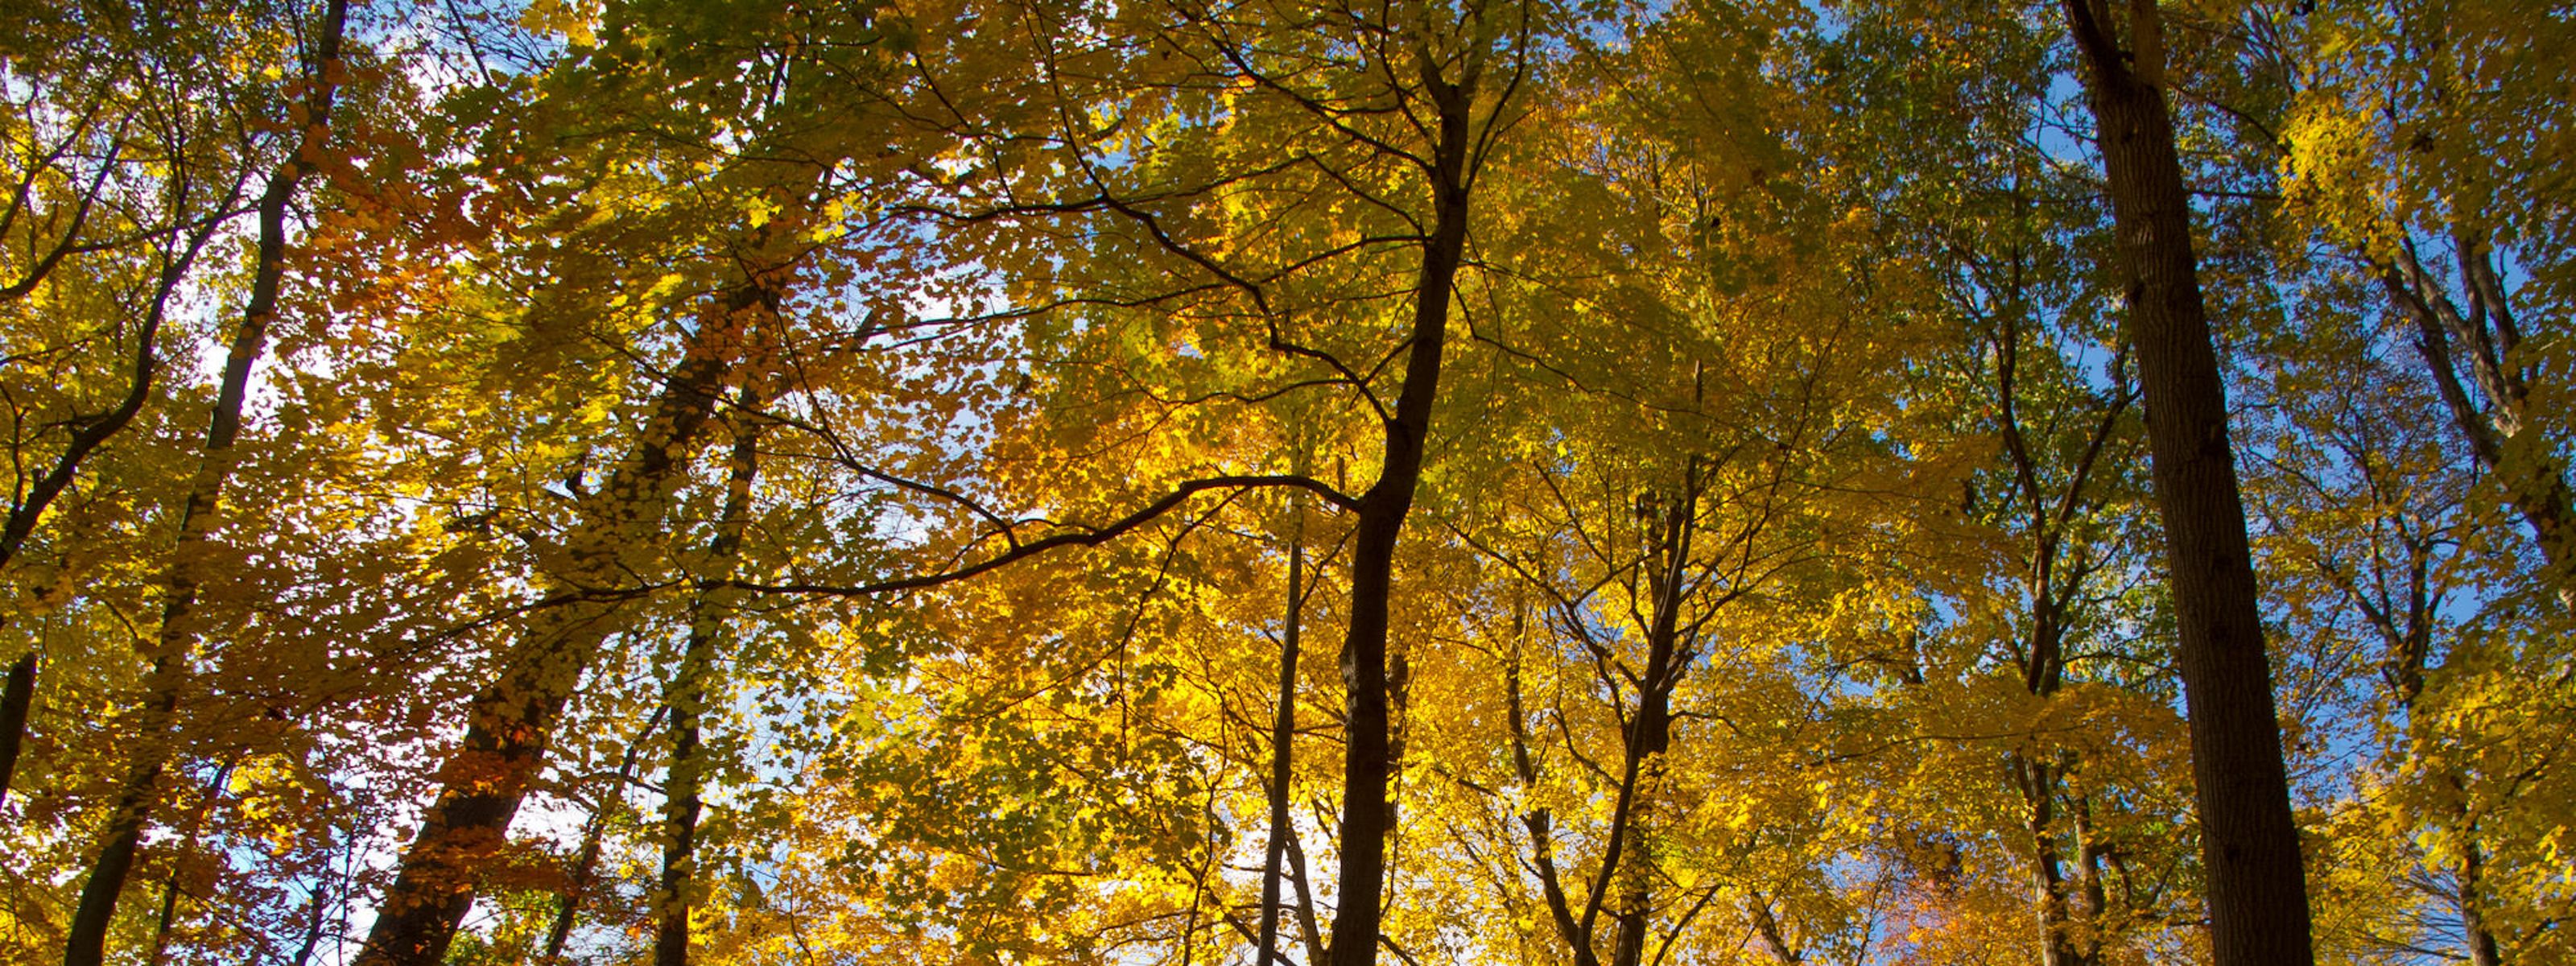 A tree canopy of bright yellow leaves spread against a blue sky.